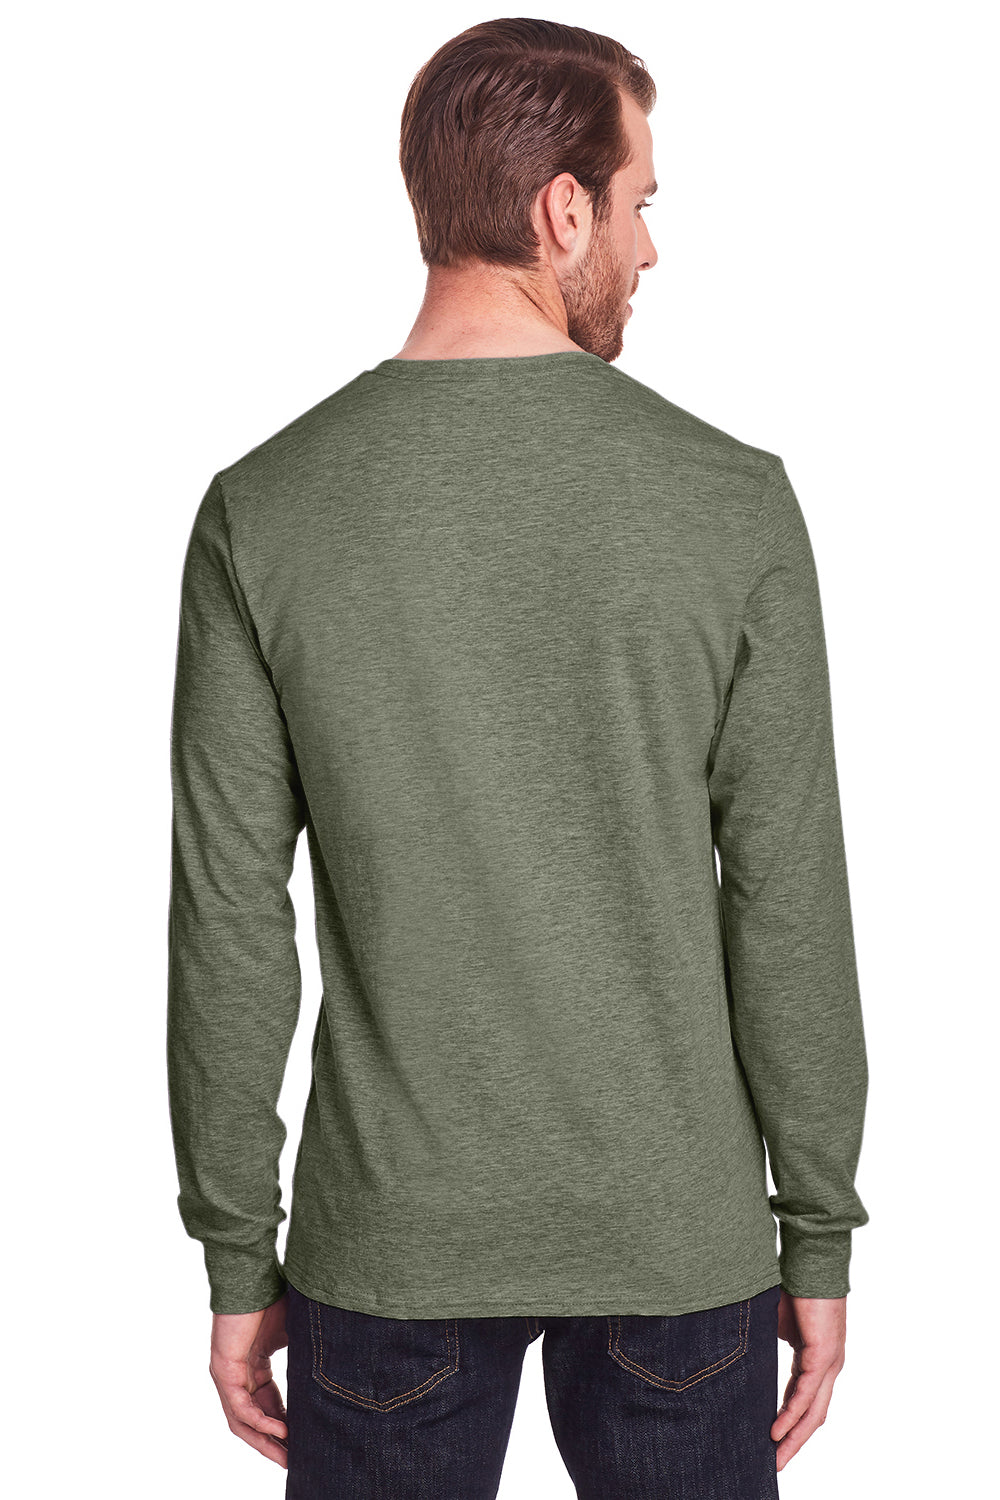 Fruit Of The Loom IC47LSR Mens Iconic Long Sleeve Crewneck T-Shirt Heather Military Green Back